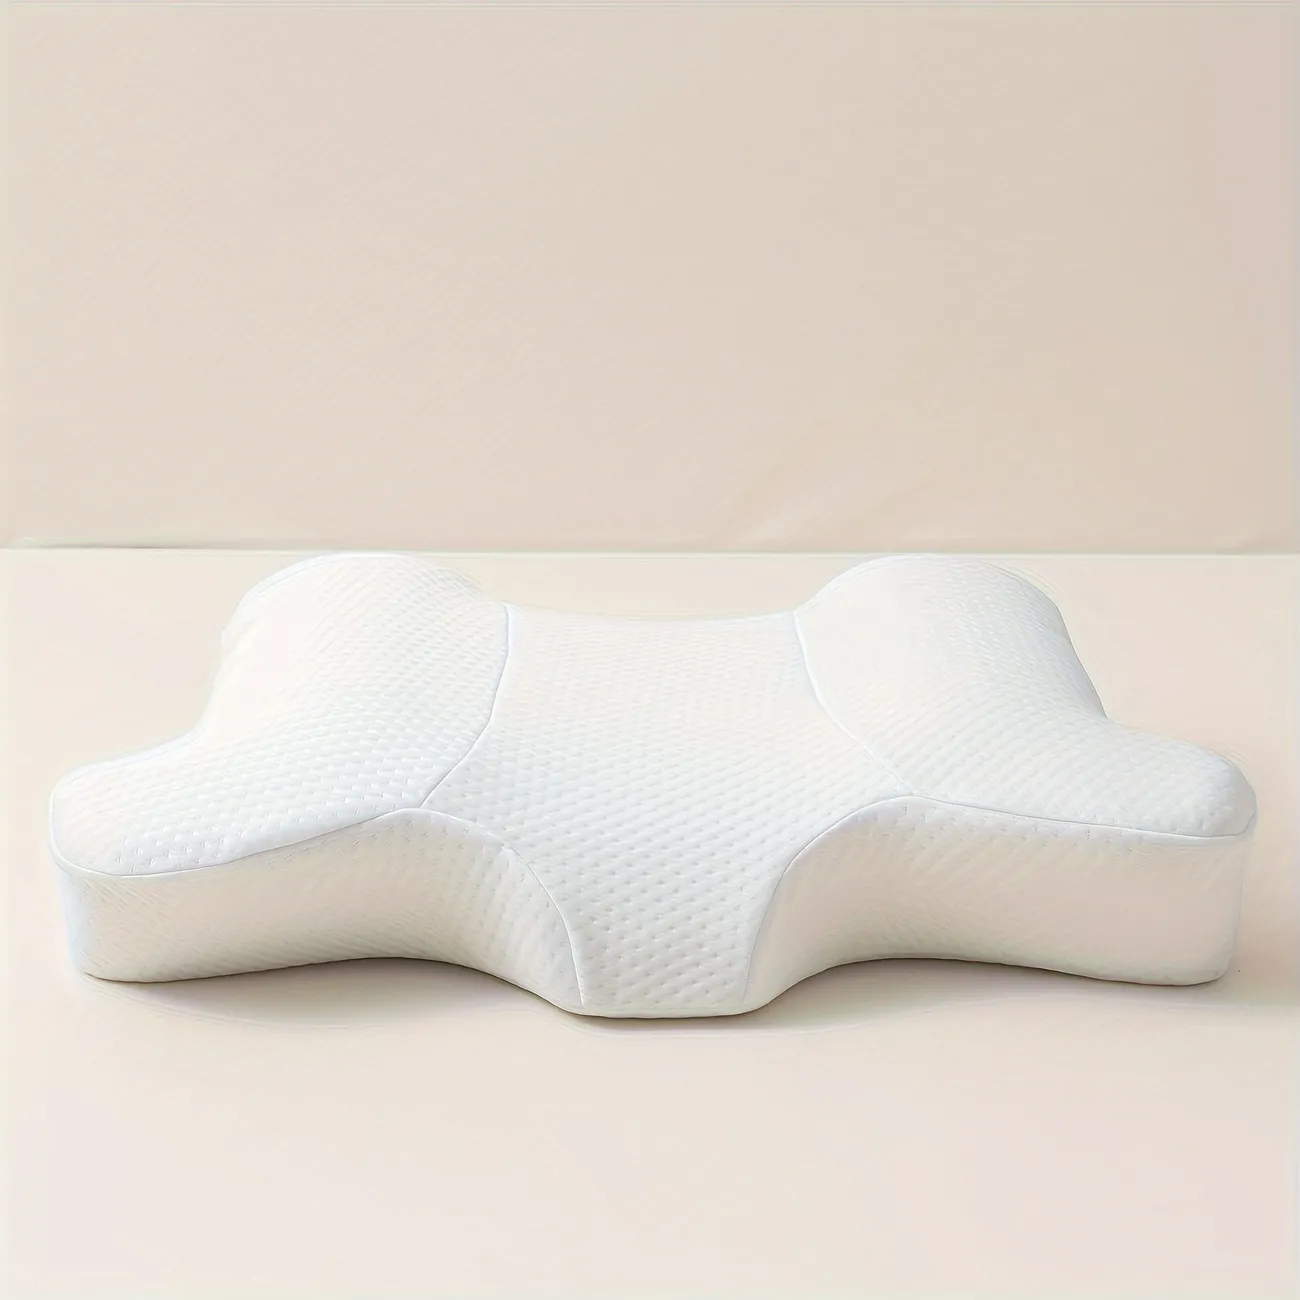 Beauty Pillow For Sleeping, Support Pillow For Shoulder And Back Relax,  Cervical Beauty Pillow, Anti Wrinkle Anti Aging Back Sleeping Pillow,  Wrinkle Prevention Pillow To Keep Head Straight, Back Sleep Training Pillow  